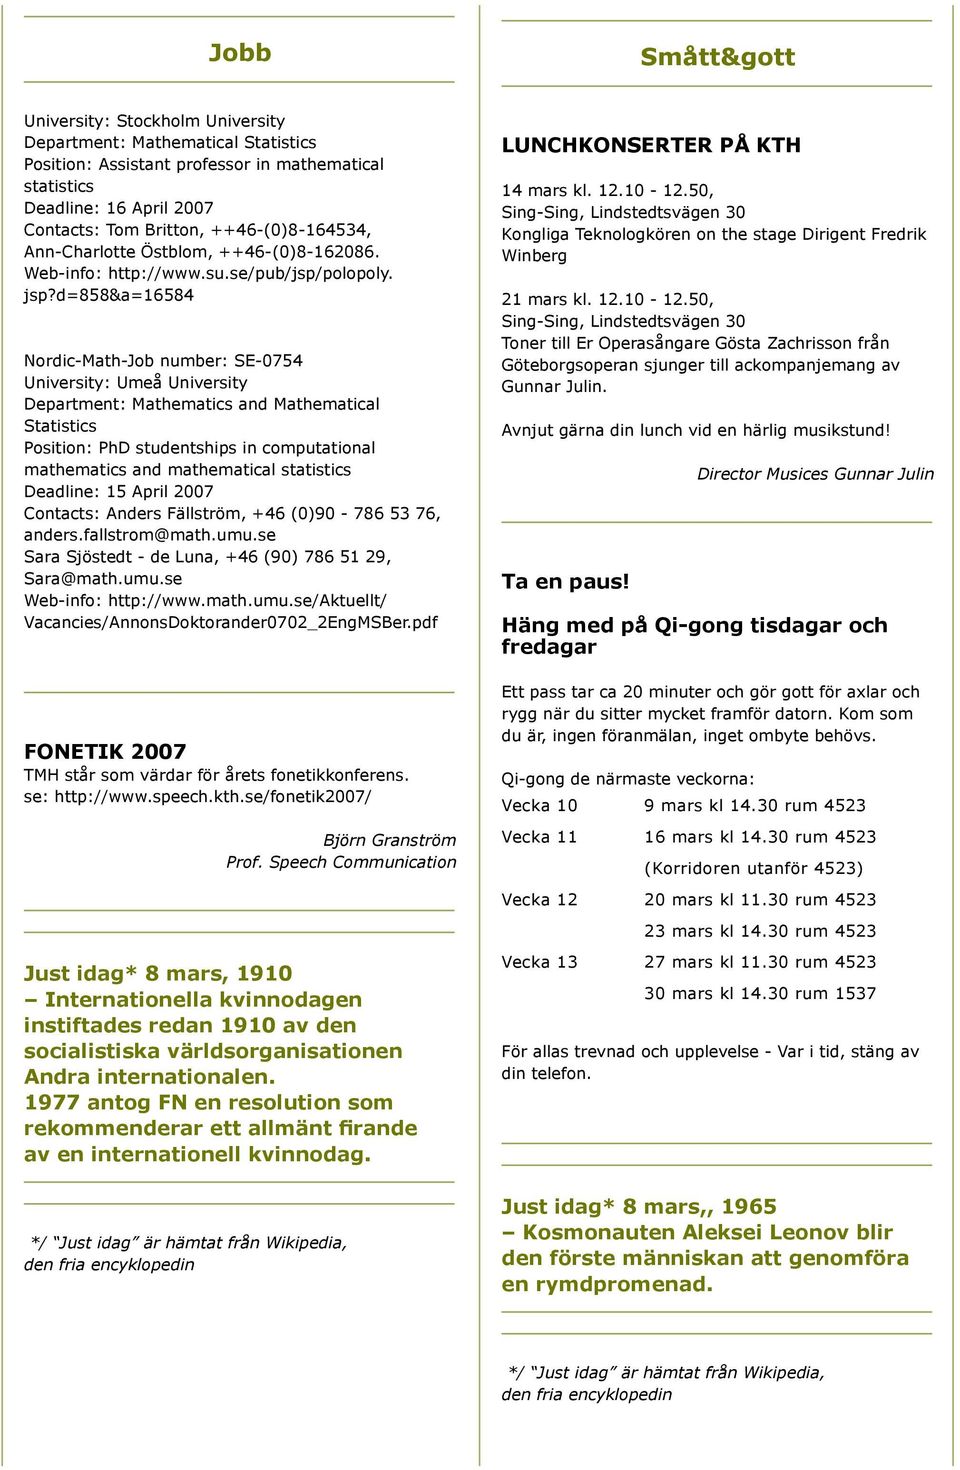 d=858&a=16584 Nordic-Math-Job number: SE-0754 University: Umeå University Department: Mathematics and Mathematical Statistics Position: PhD studentships in computational mathematics and mathematical